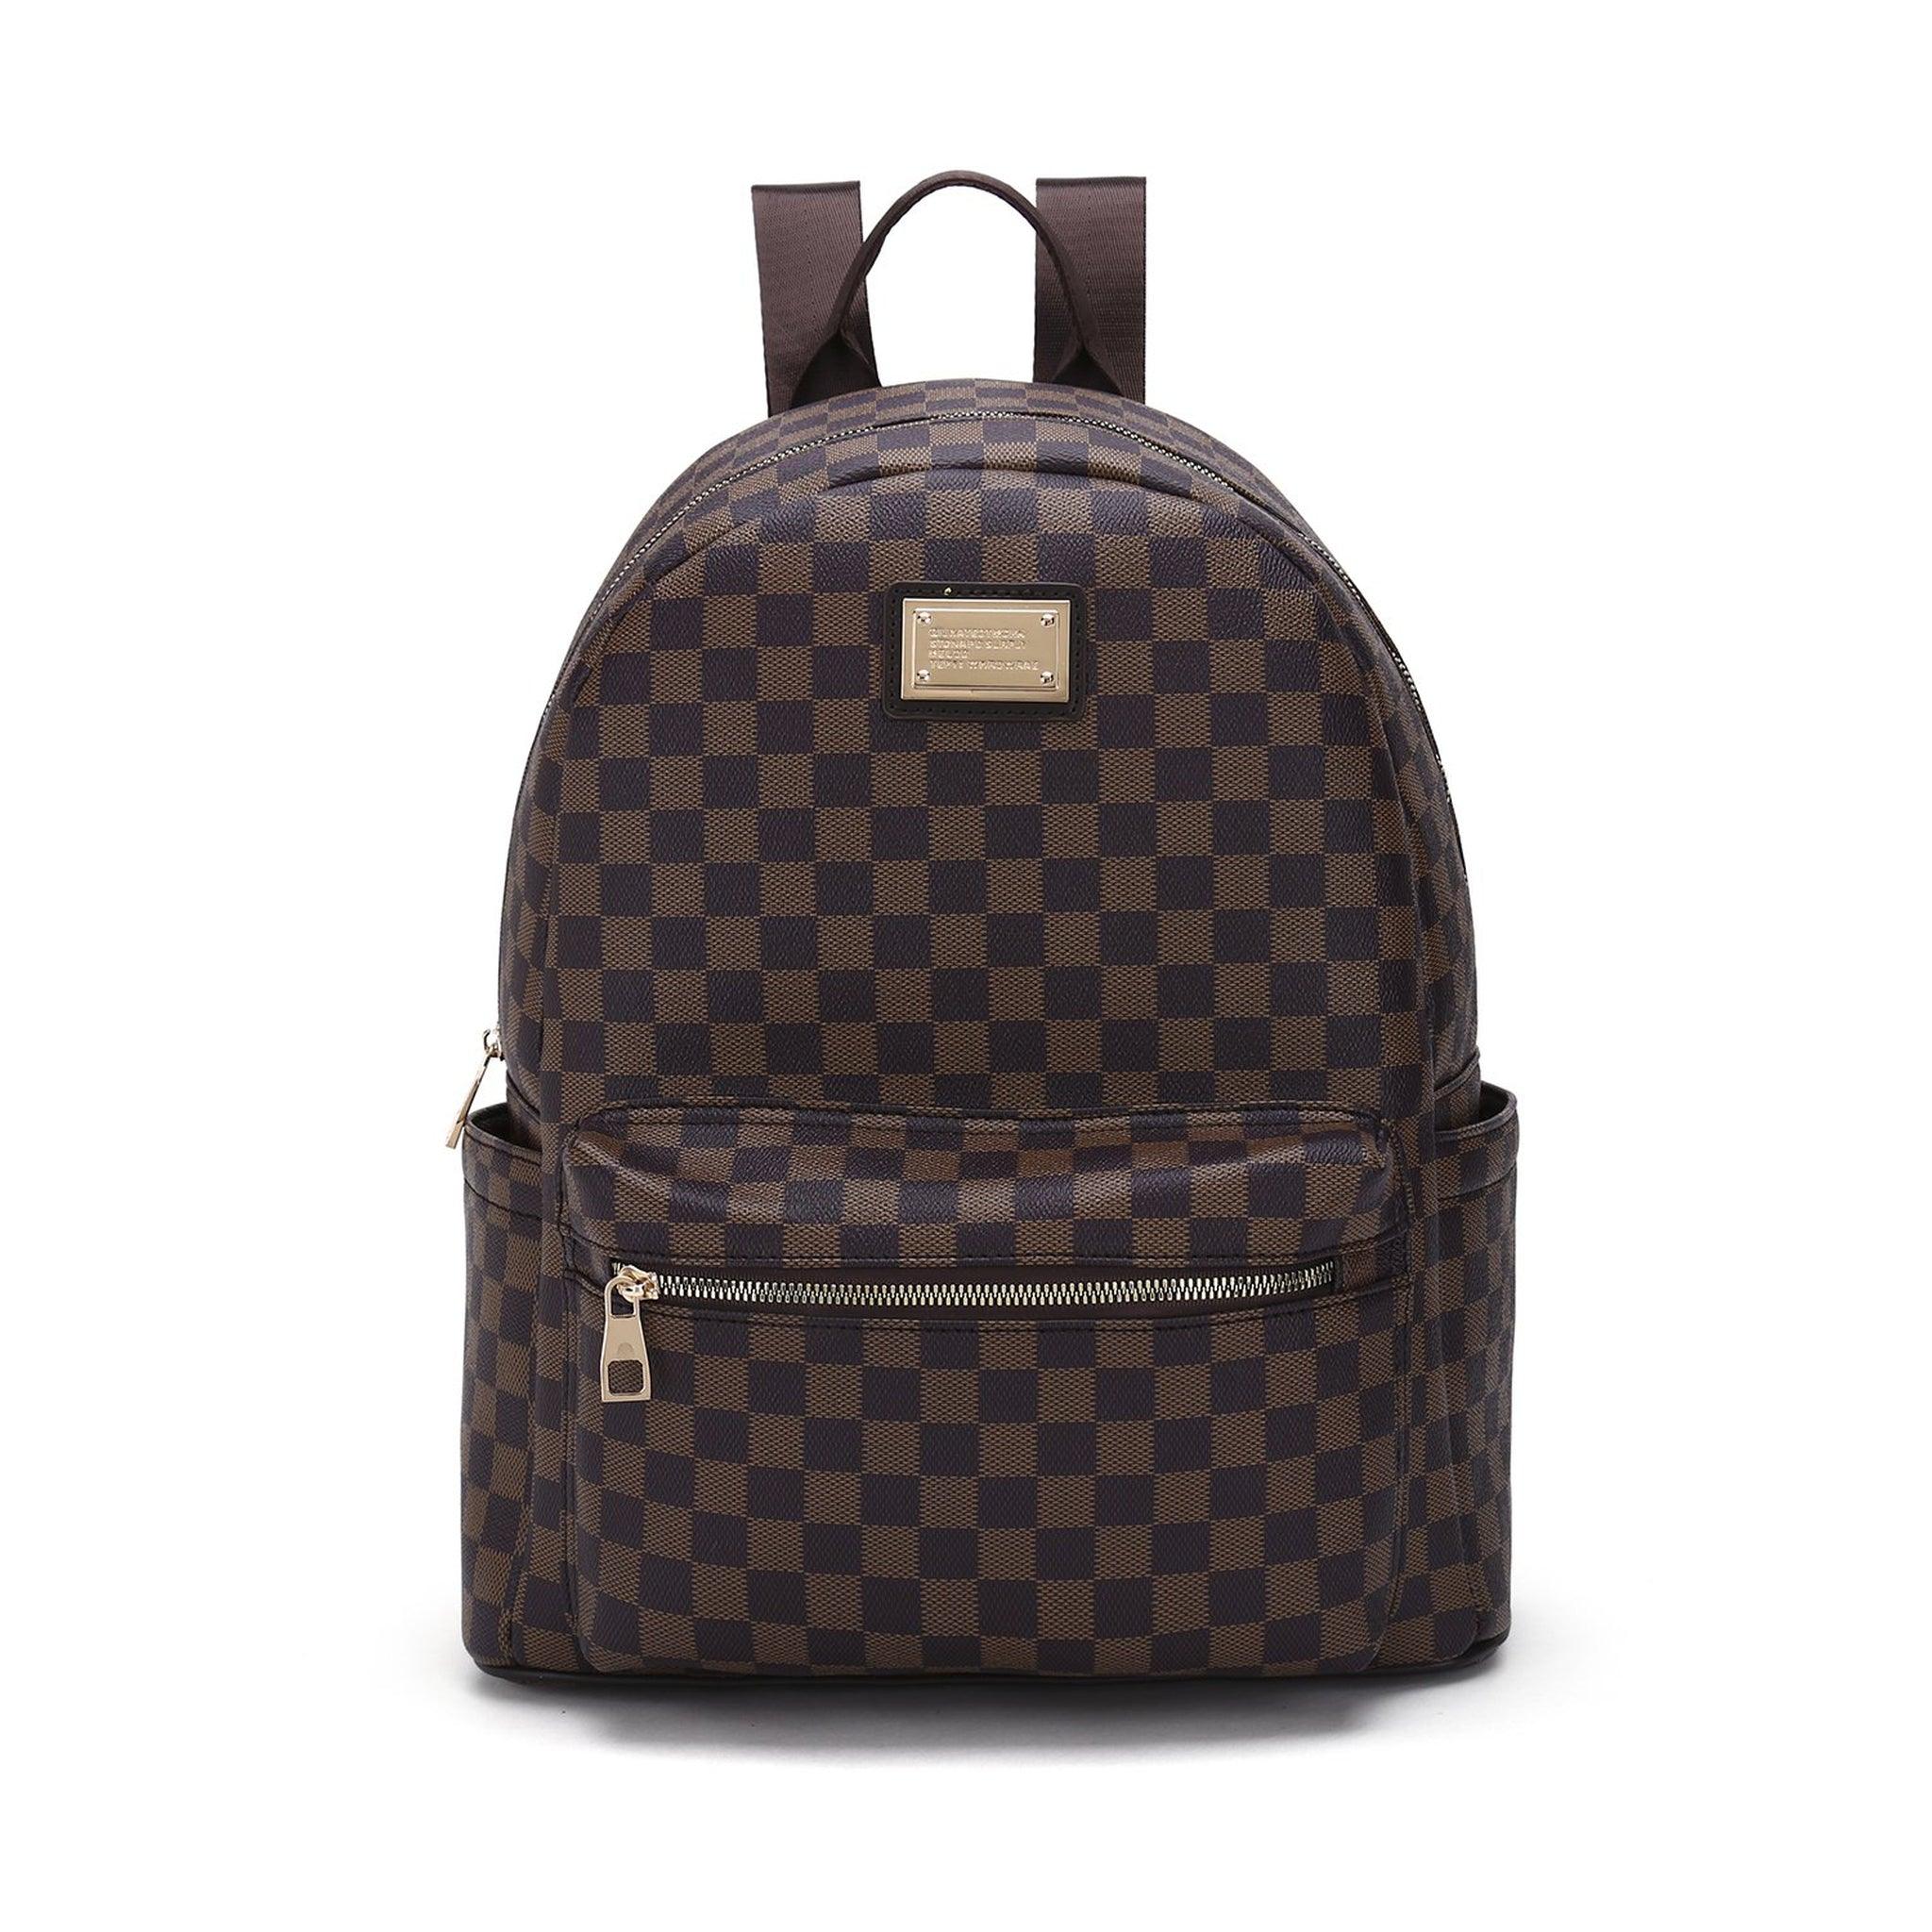 Women's Checkered Print Leather Backpack - FR Fashion Co.